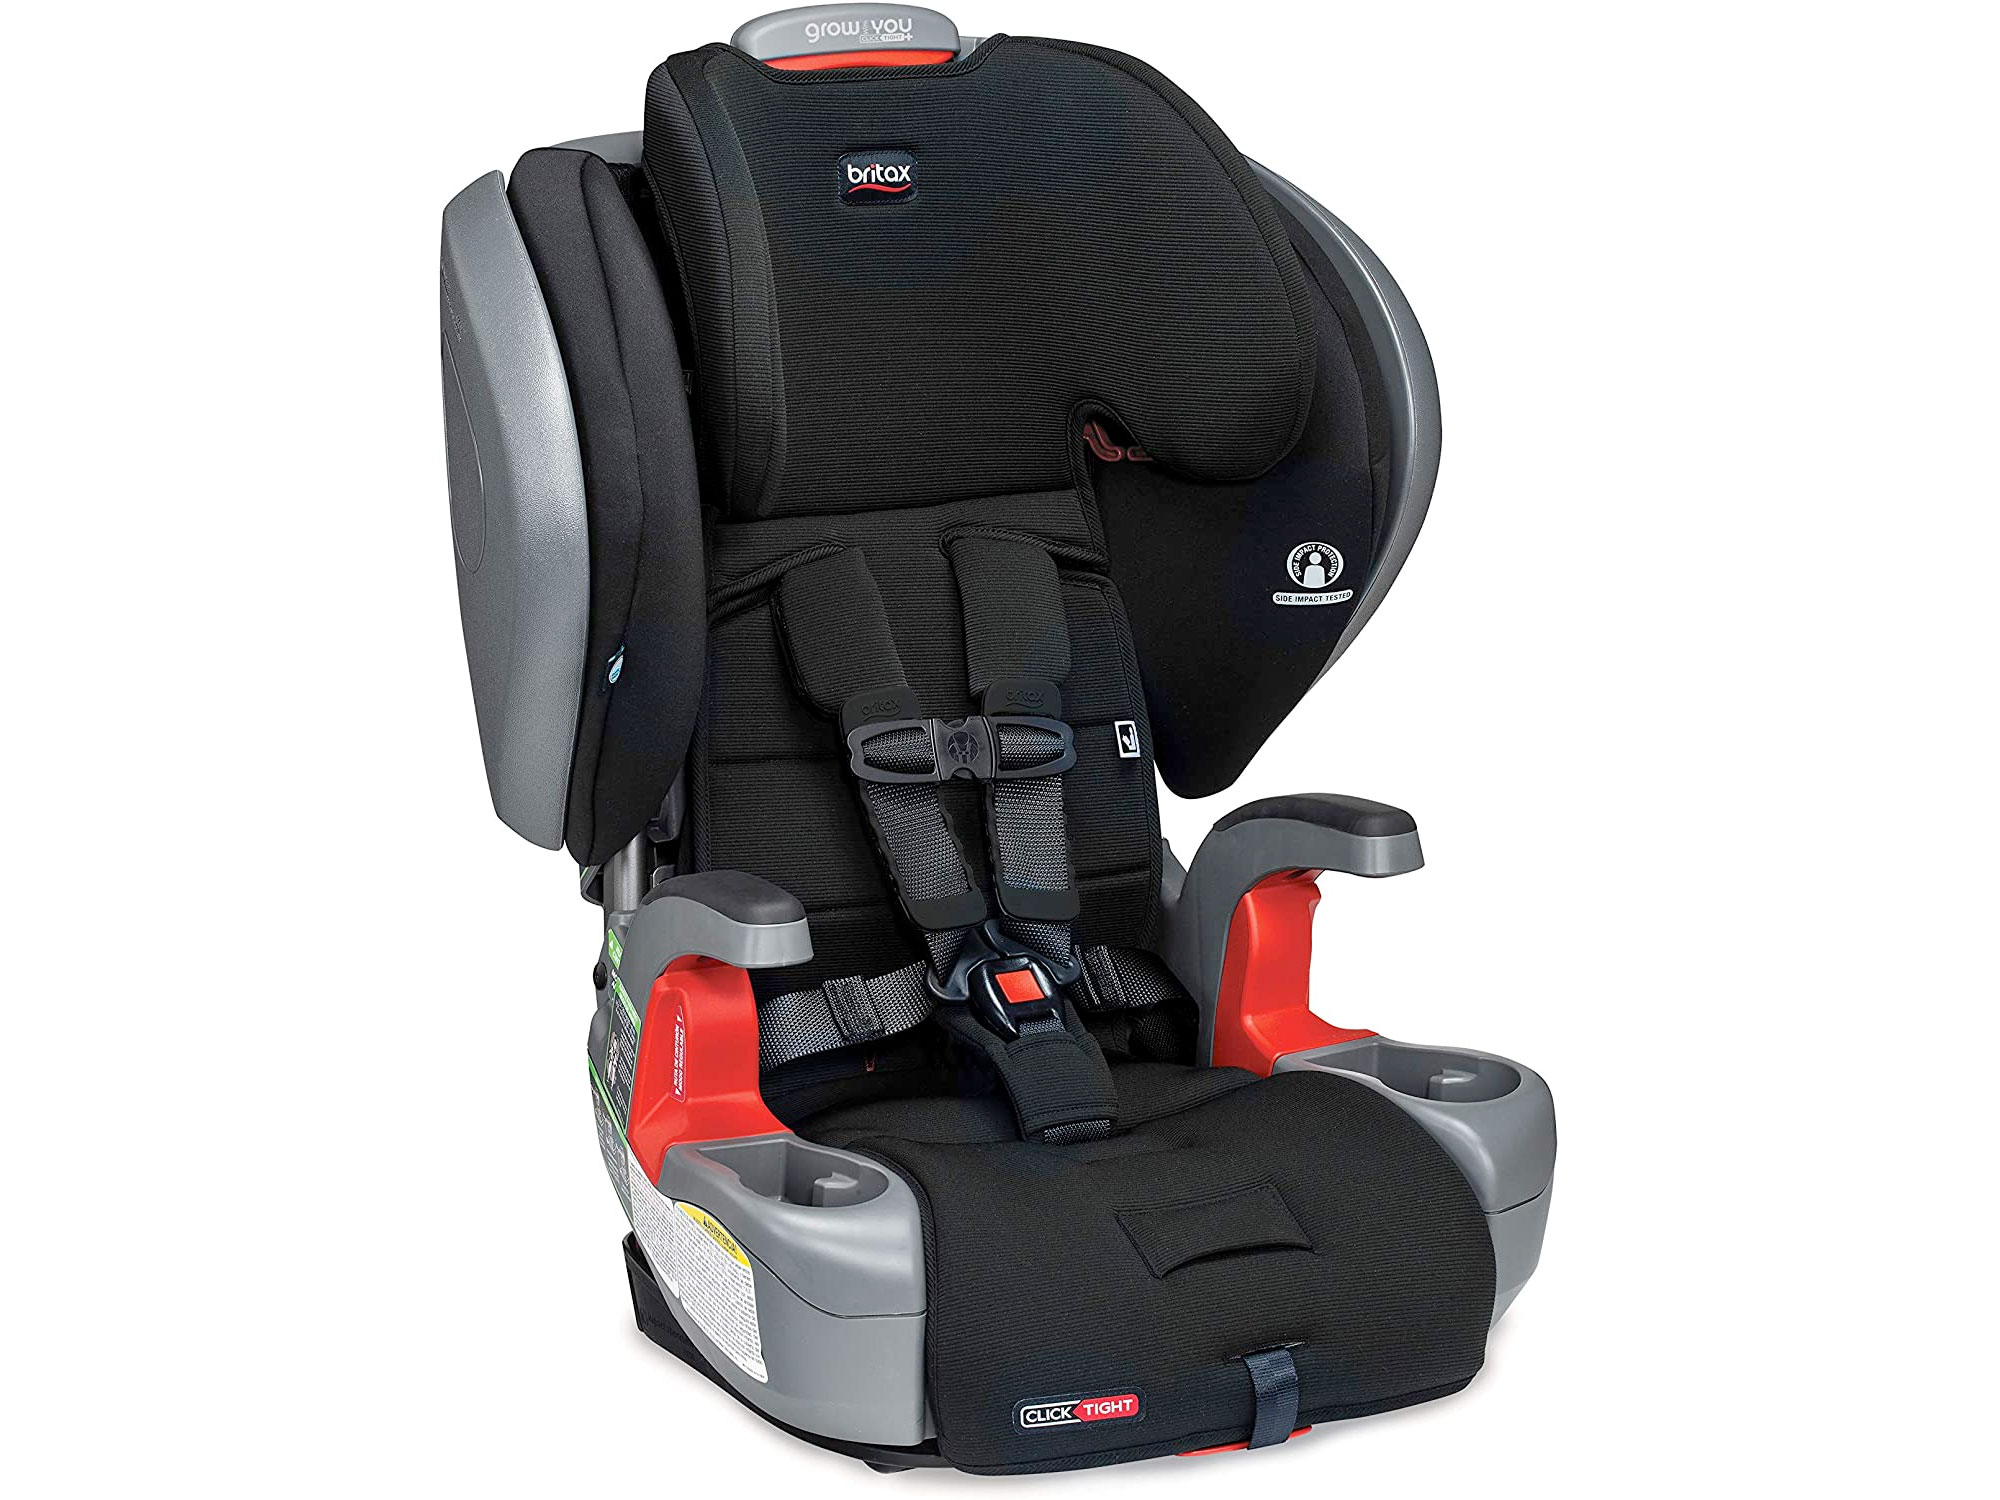 Amazon：BRITAX Grow with You ClickTight Plus Harness-2-Booster Car Seat只卖$441.99